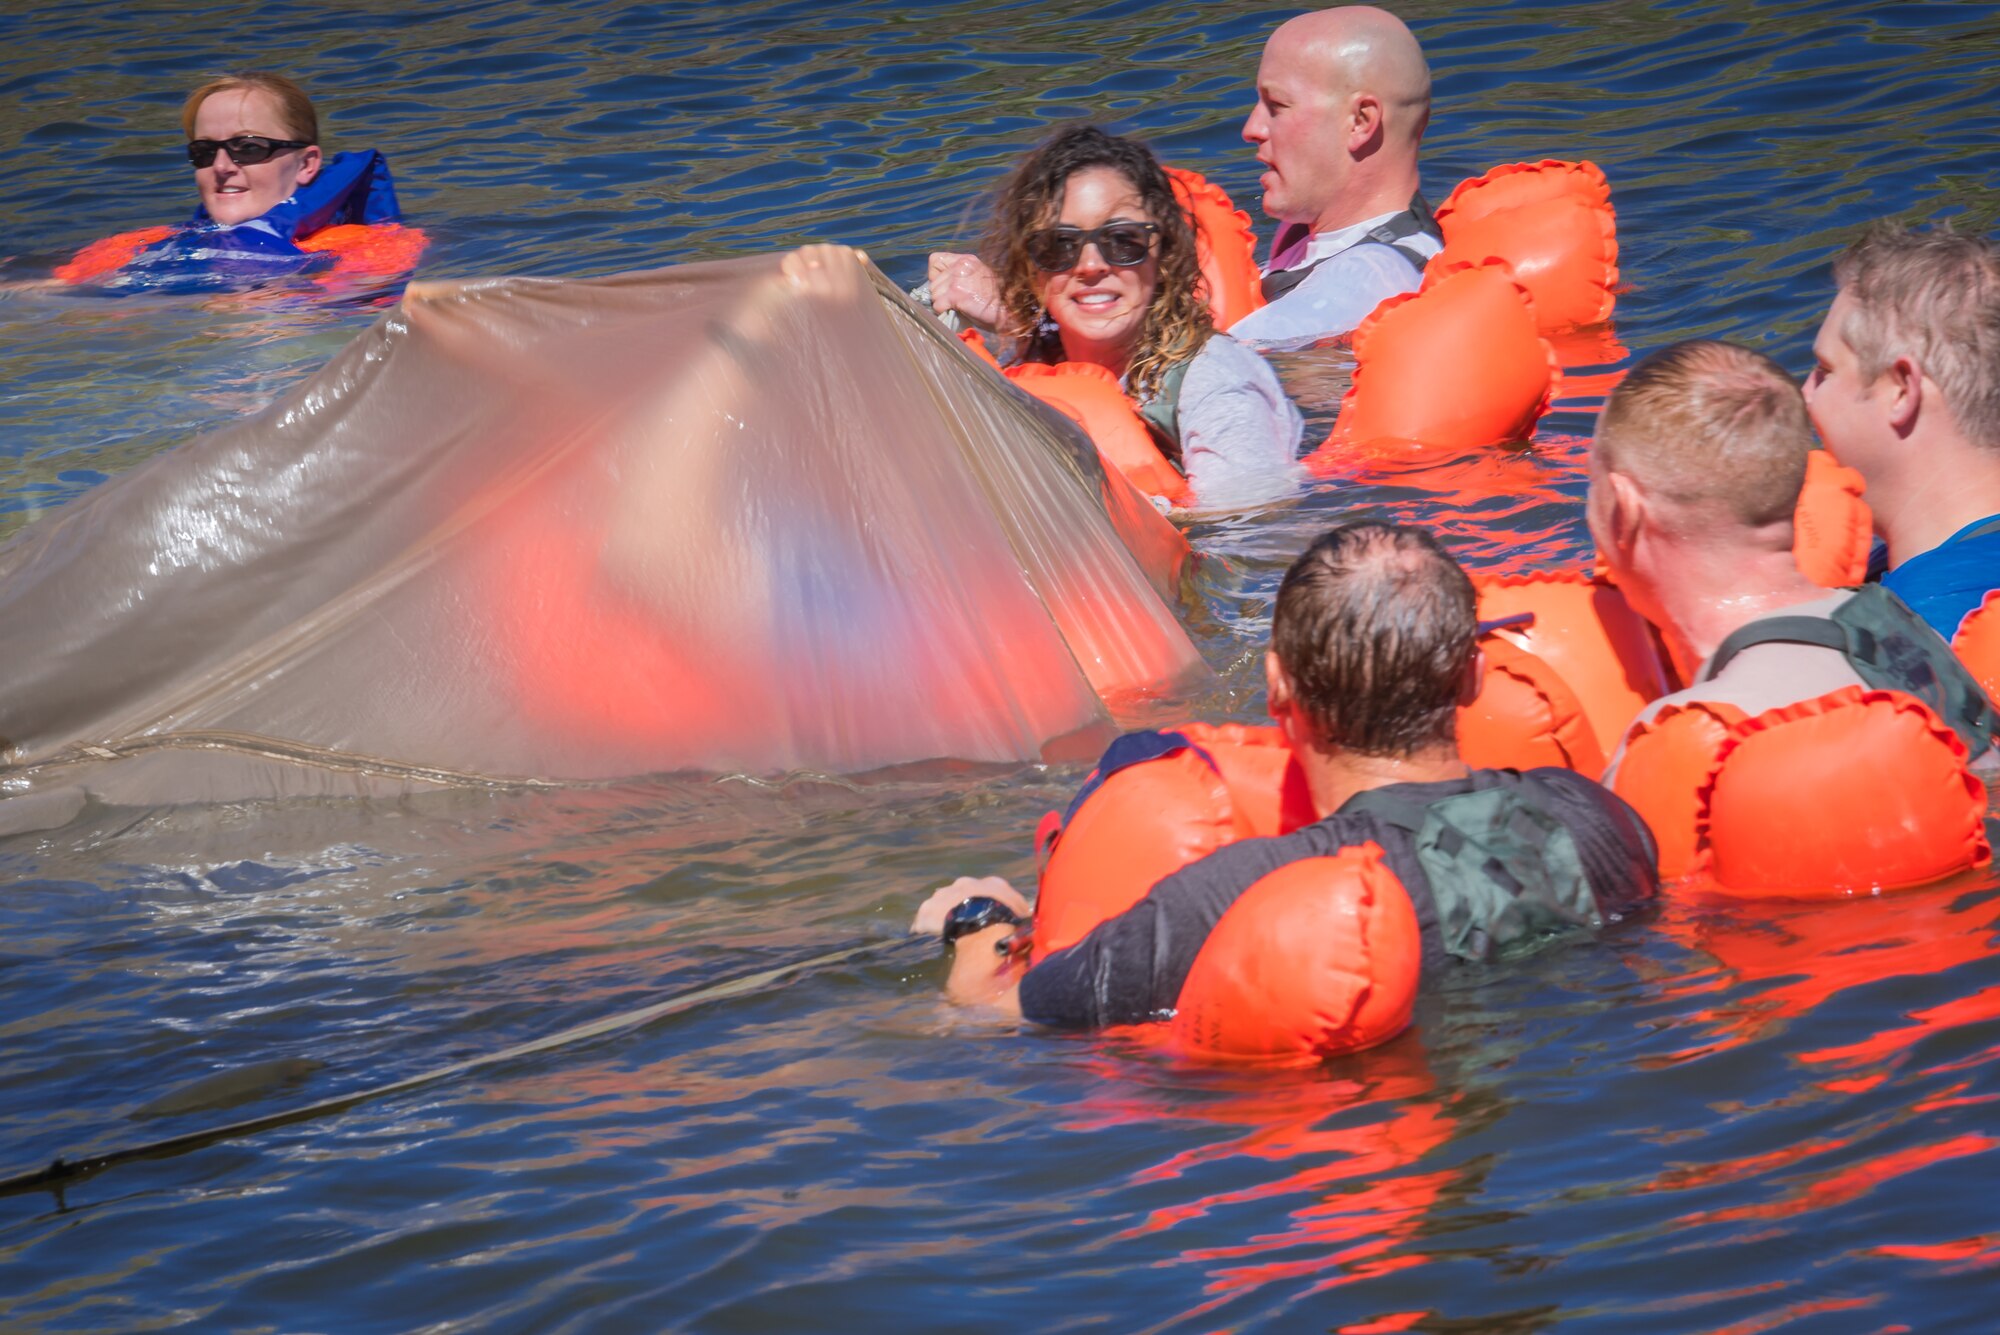 U.S. Air Force airmen assigned to the 153rd Airlift Wing, Wyoming Air National Guard practice maneuvering out from under a downed canopy during water survival training Sept 10, 2016, at Curt Gowdy state park, Cheyenne, Wyoming. Aircrew flight equipment instructors recertify aircrew members water survival skills every three years.  (U.S. Air National Guard photo by Tech. Sgt. John Galvin)